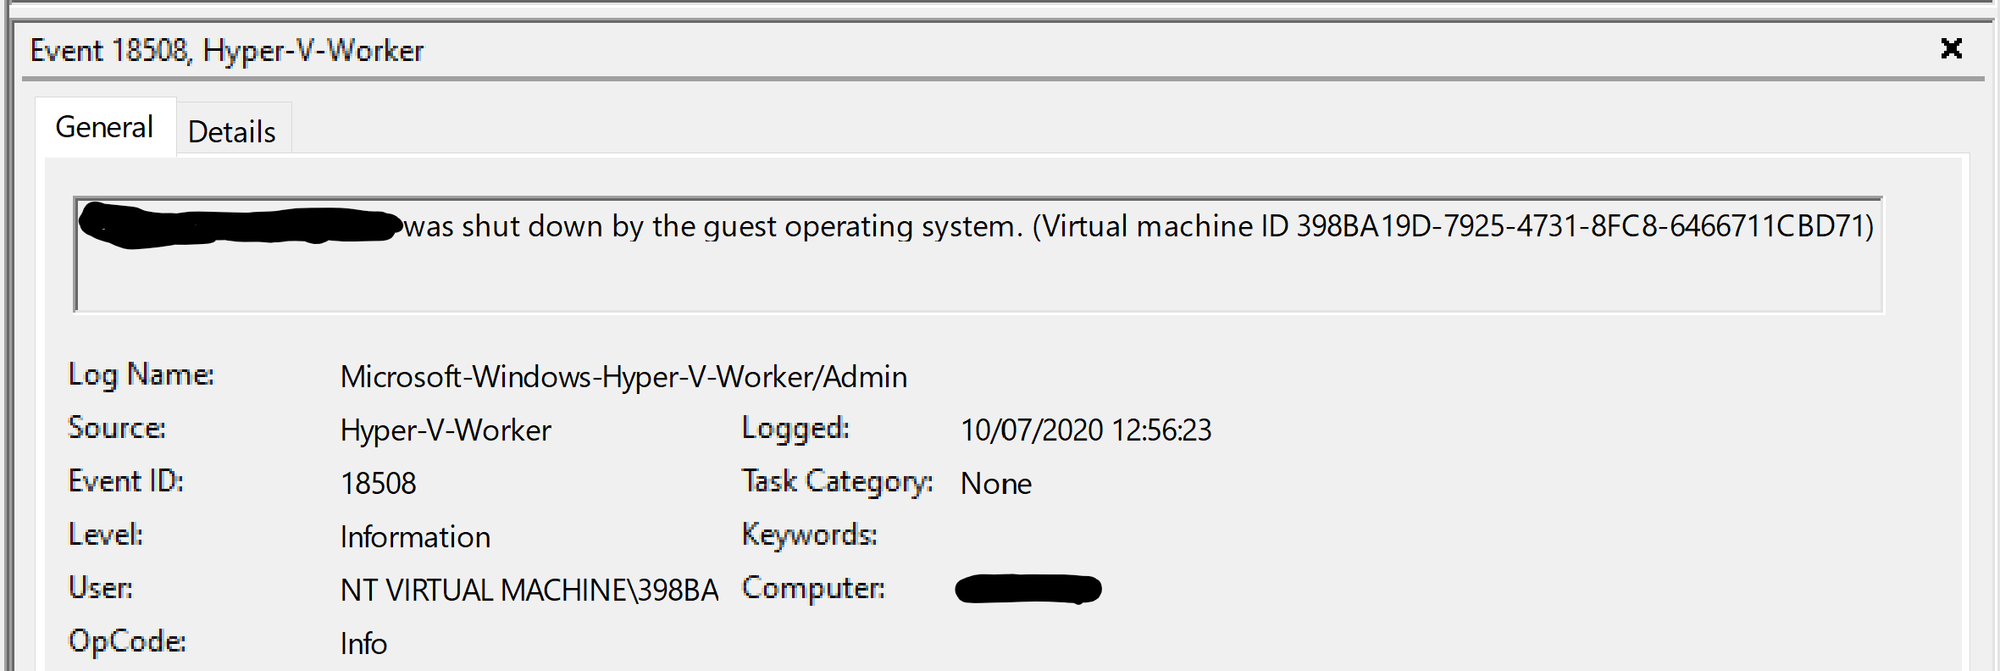 Hyper-V Automatically being shut down randomly by the guest operating system c5539cb9-d1be-47fd-a62e-c9efd2438d9a?upload=true.png